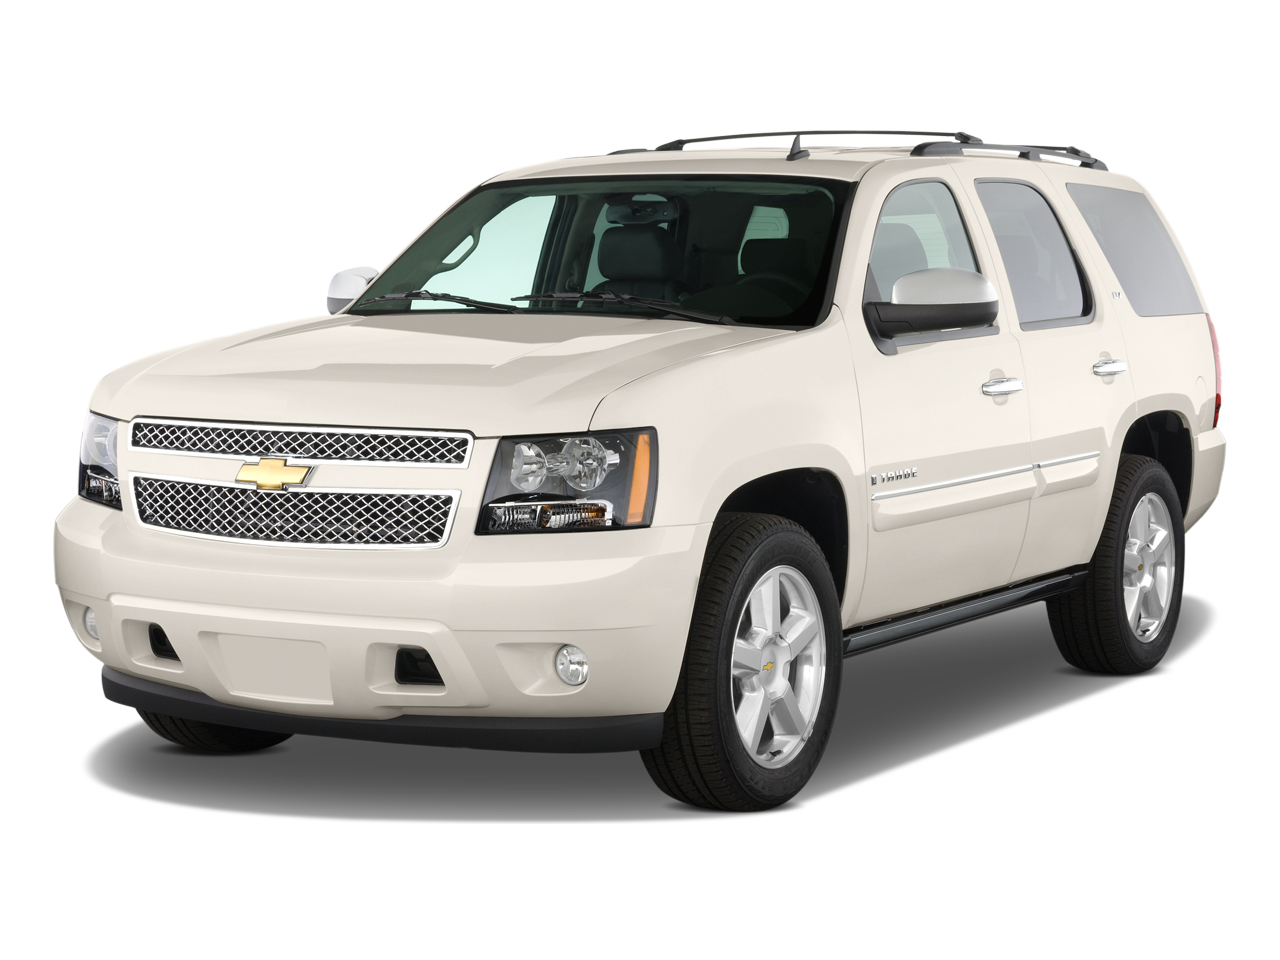 2017 Chevrolet Tahoe Chevy Review Ratings Specs S And Photos The Car Connection